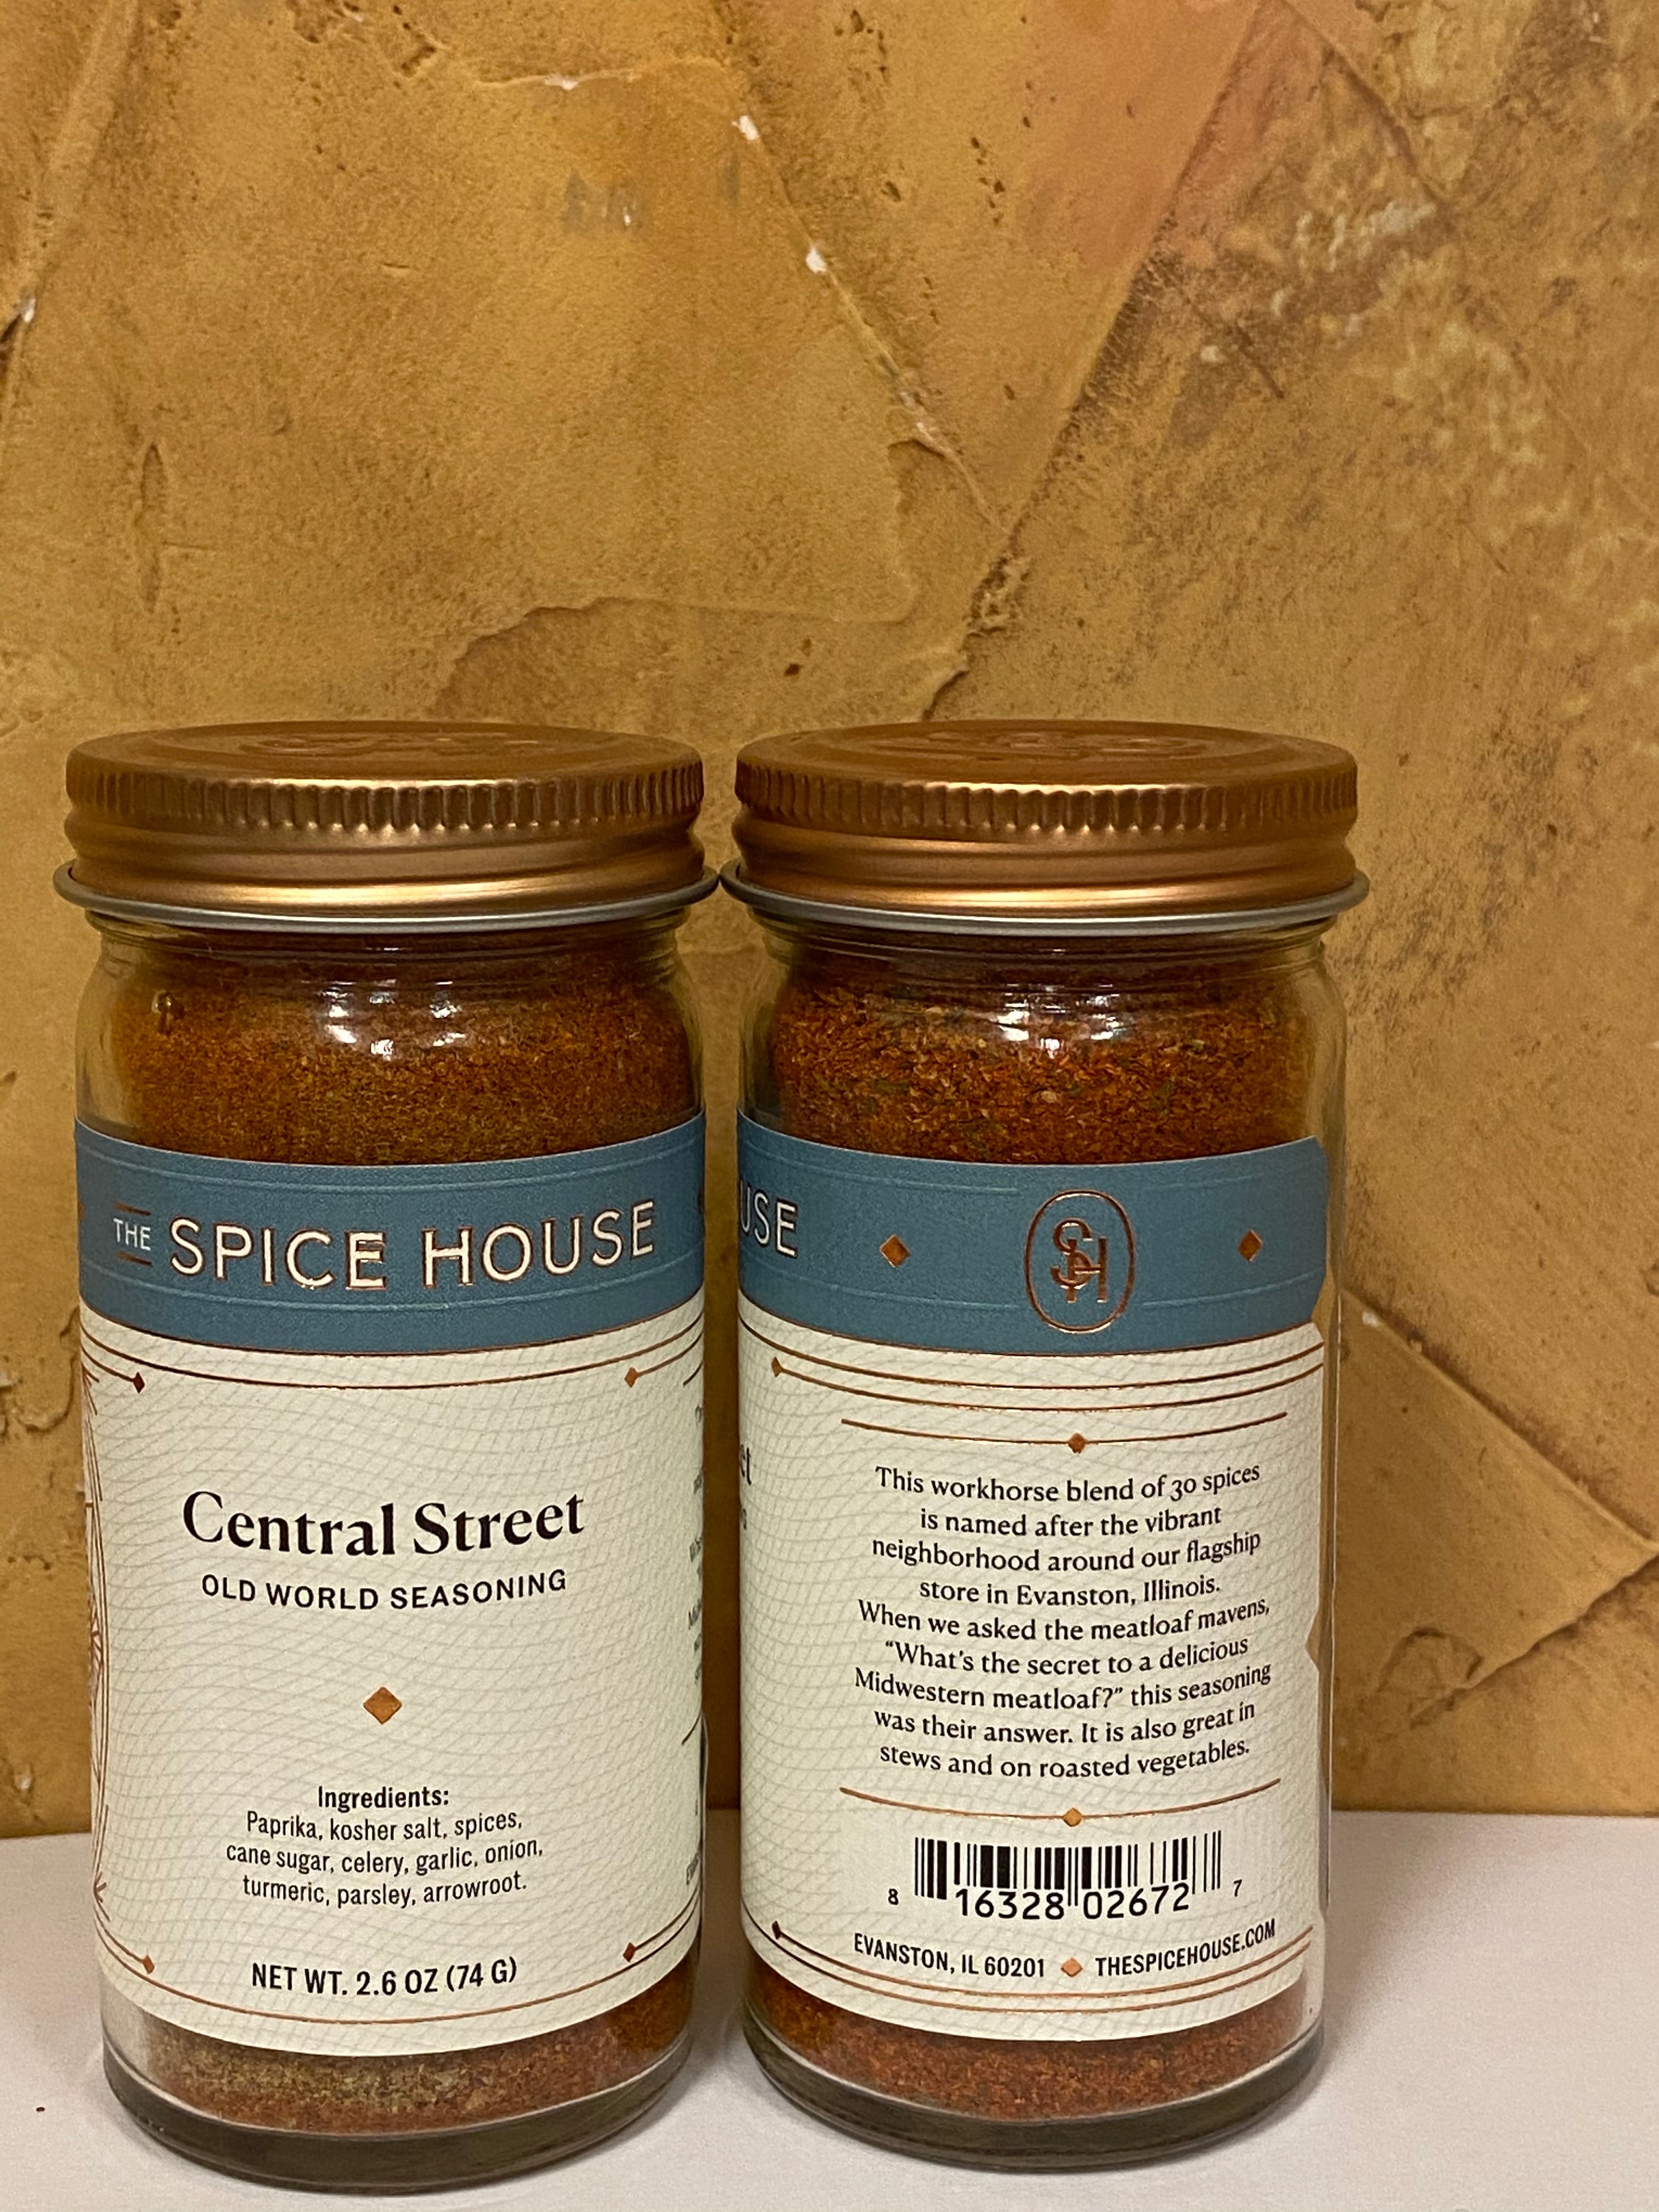 Sh*t Spices – 39 North CO